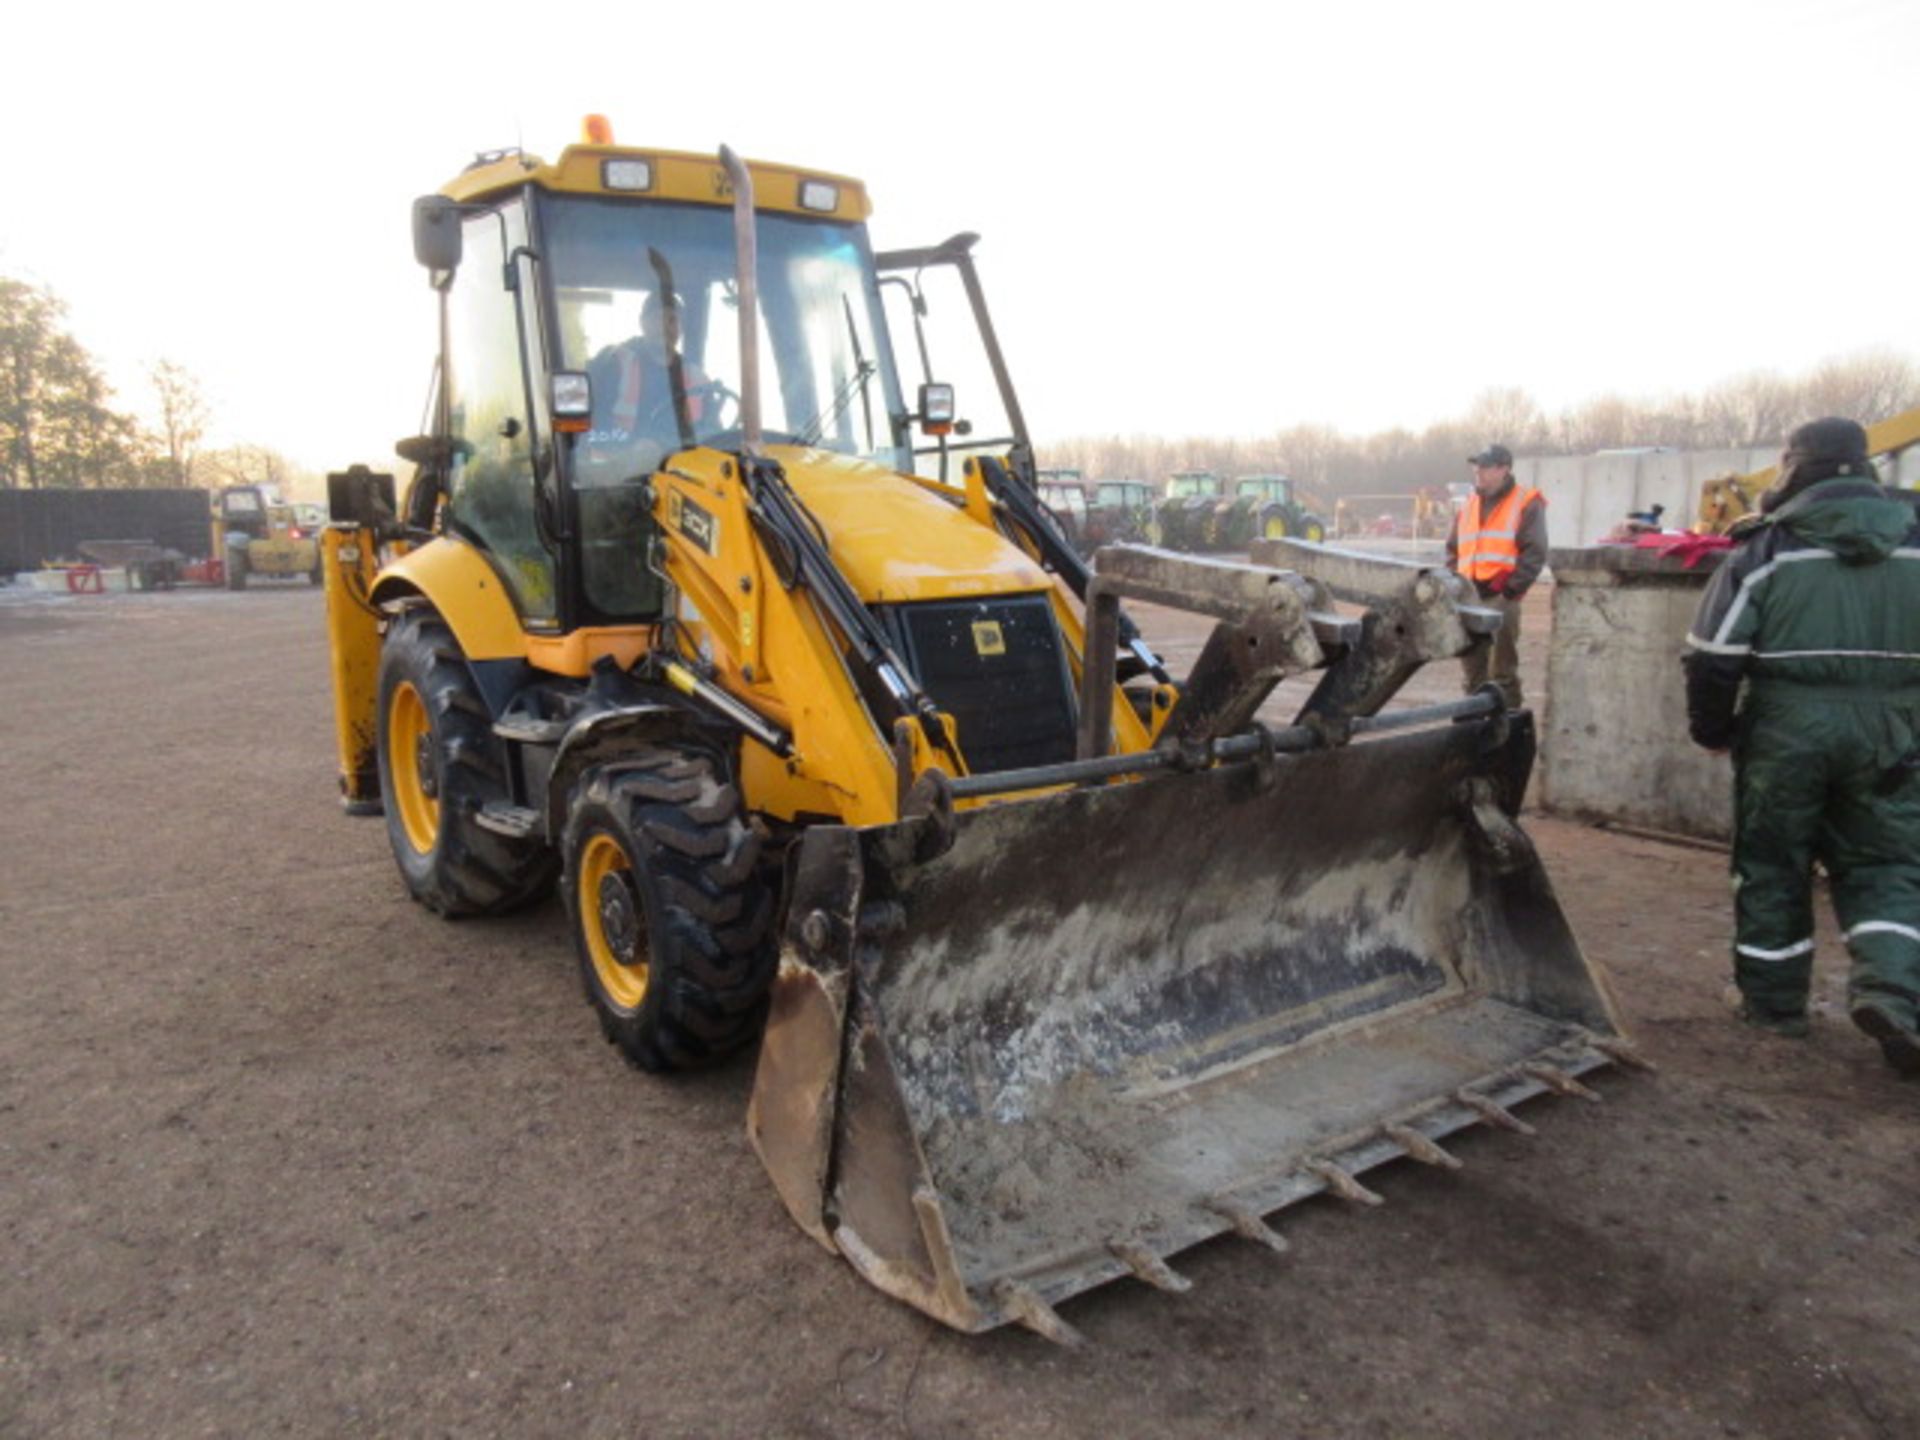 2008 JCB 3CX Sitemaster c/w Piped, Quick Hitch, 4 in 1 Bucket Ser. No. 81346092 - Image 3 of 8